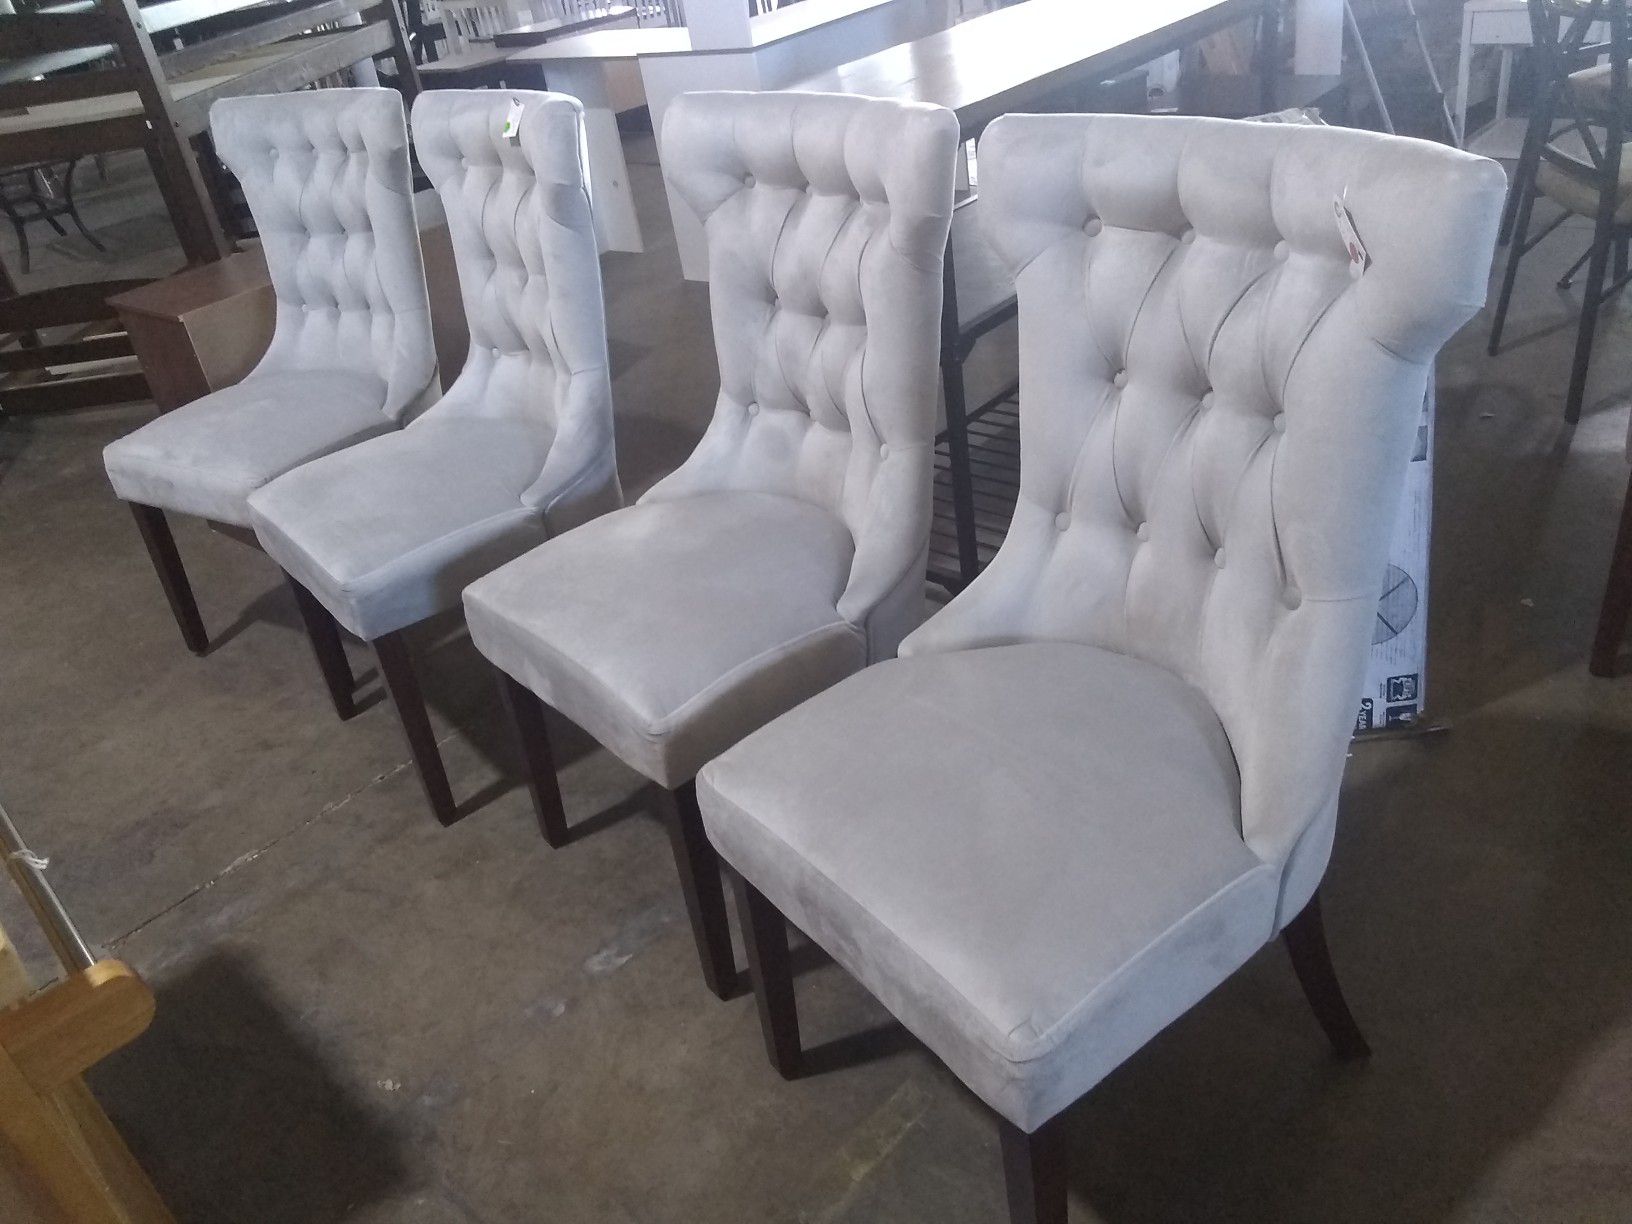 Dining Chairs $200 for all